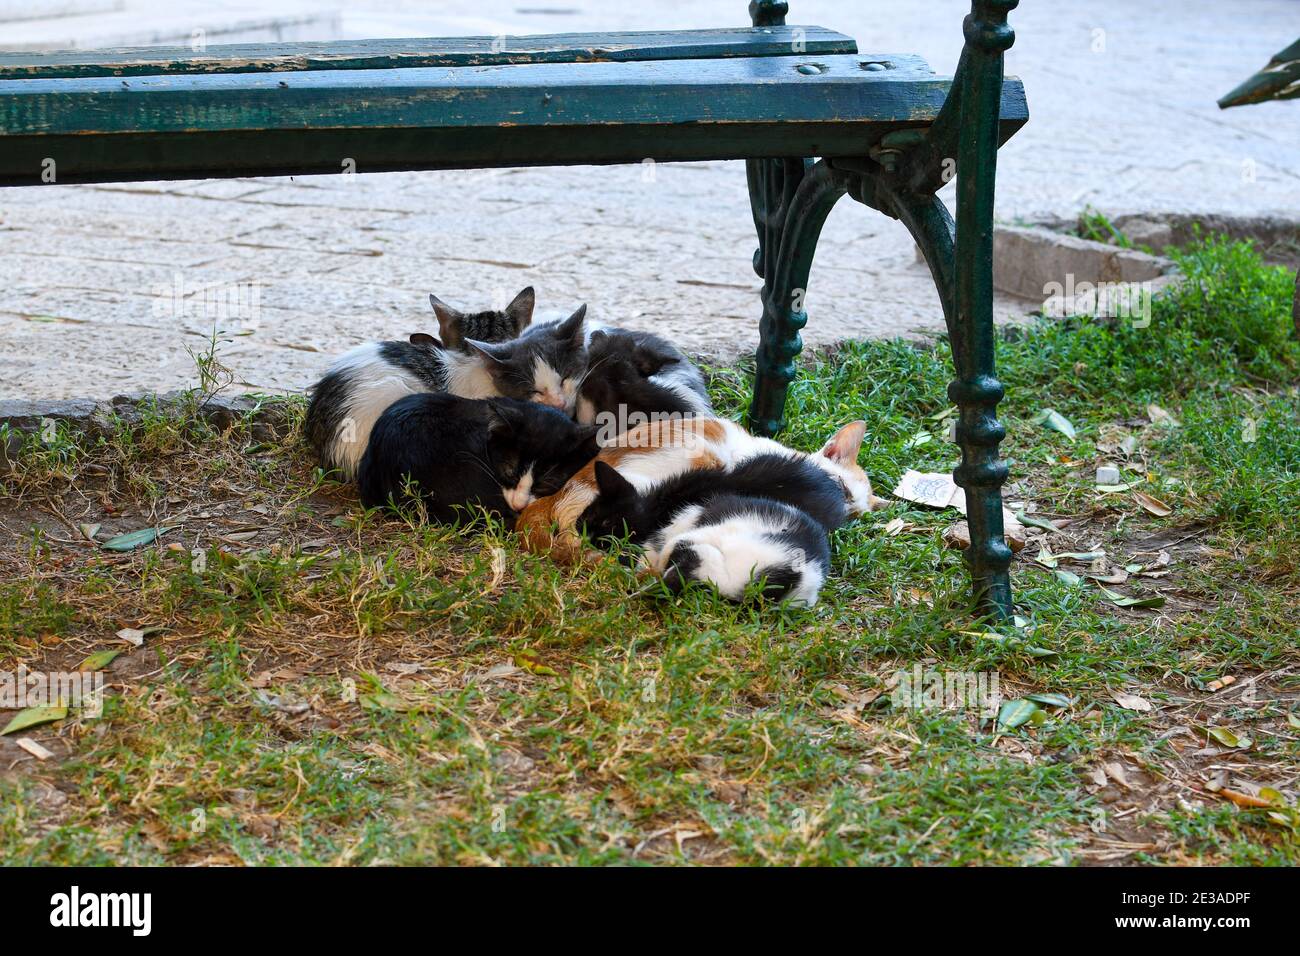 A group of sick kittens huddle together for warmth under a bench in a small park in the old town center of Kotor, Montenegro, The City of Cats. Stock Photo